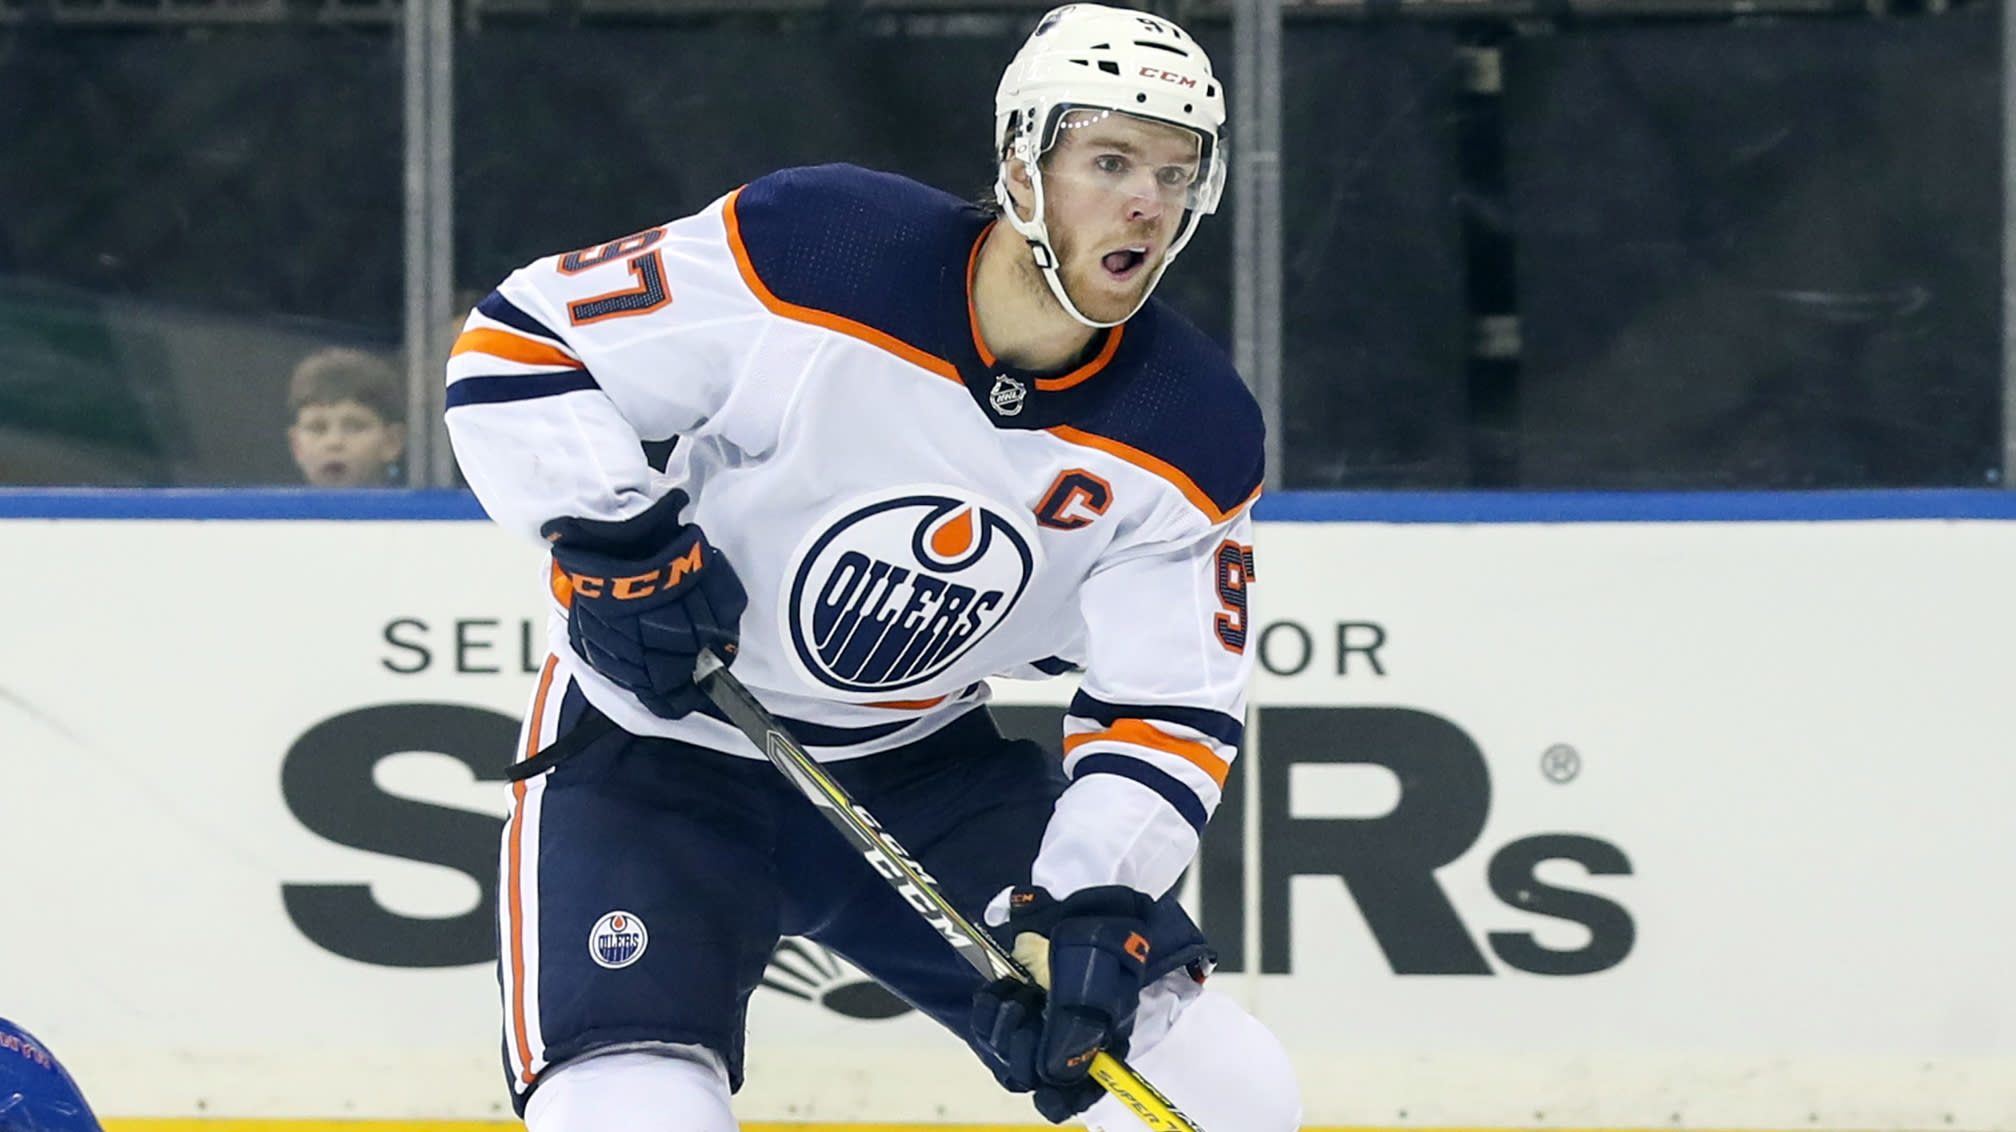 McDavid leads Oilers with six points